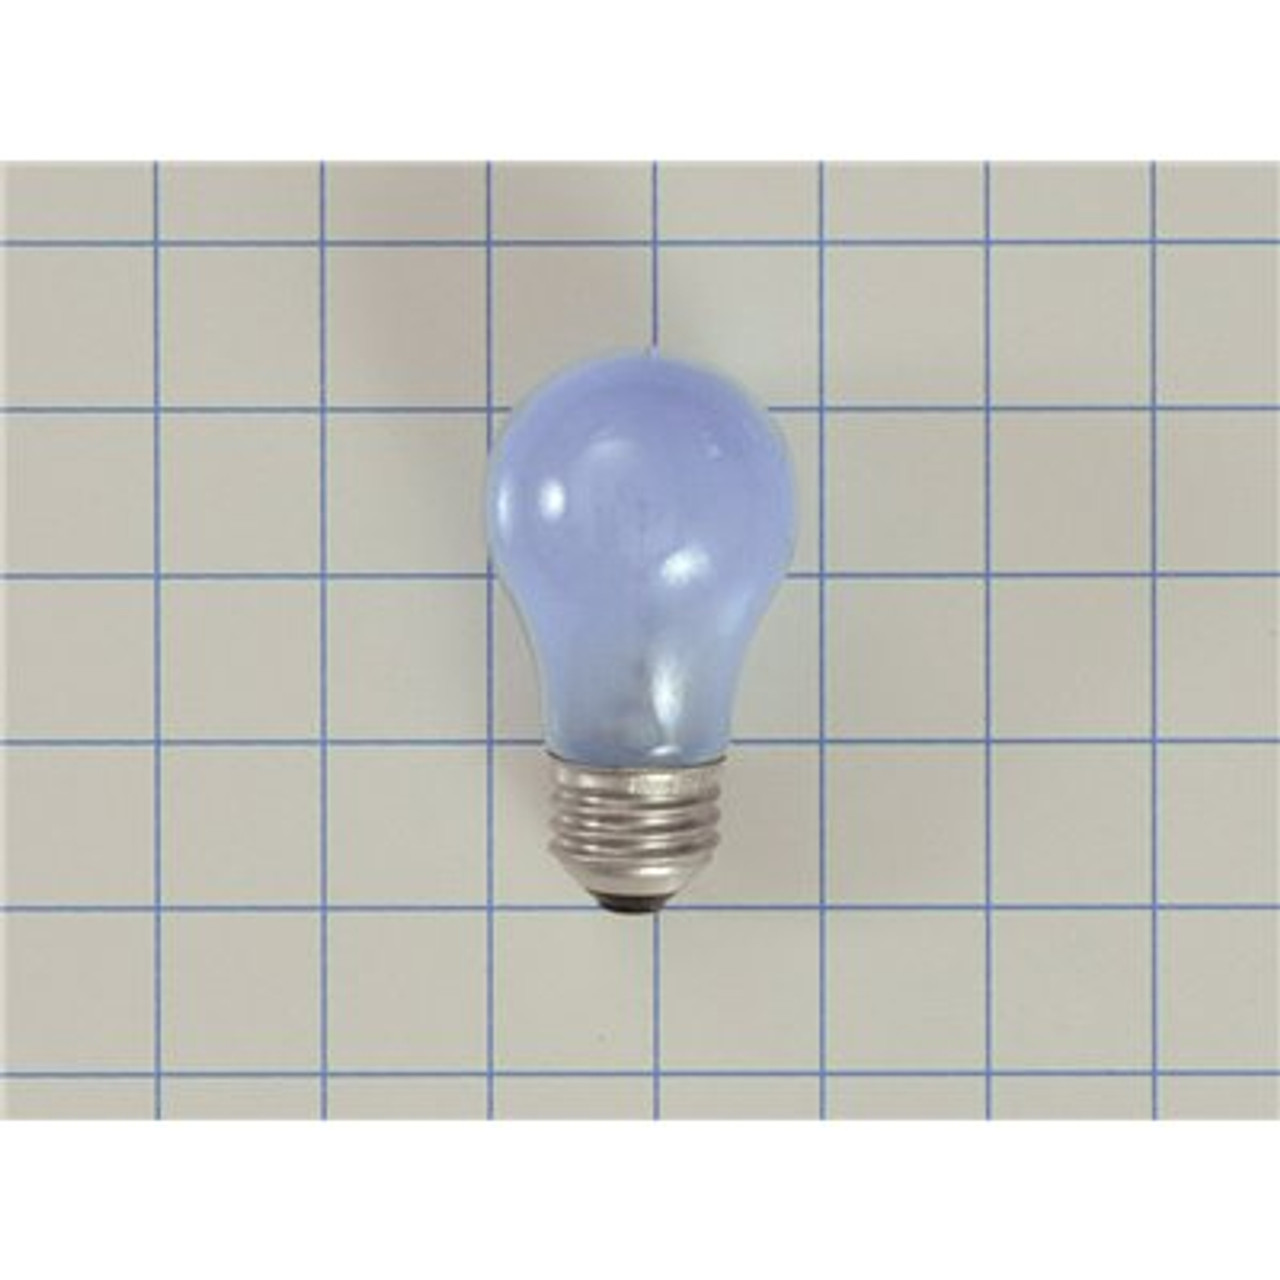 ELECTROLUX Replacement Light Bulb For Refrigerator, Part #241555401